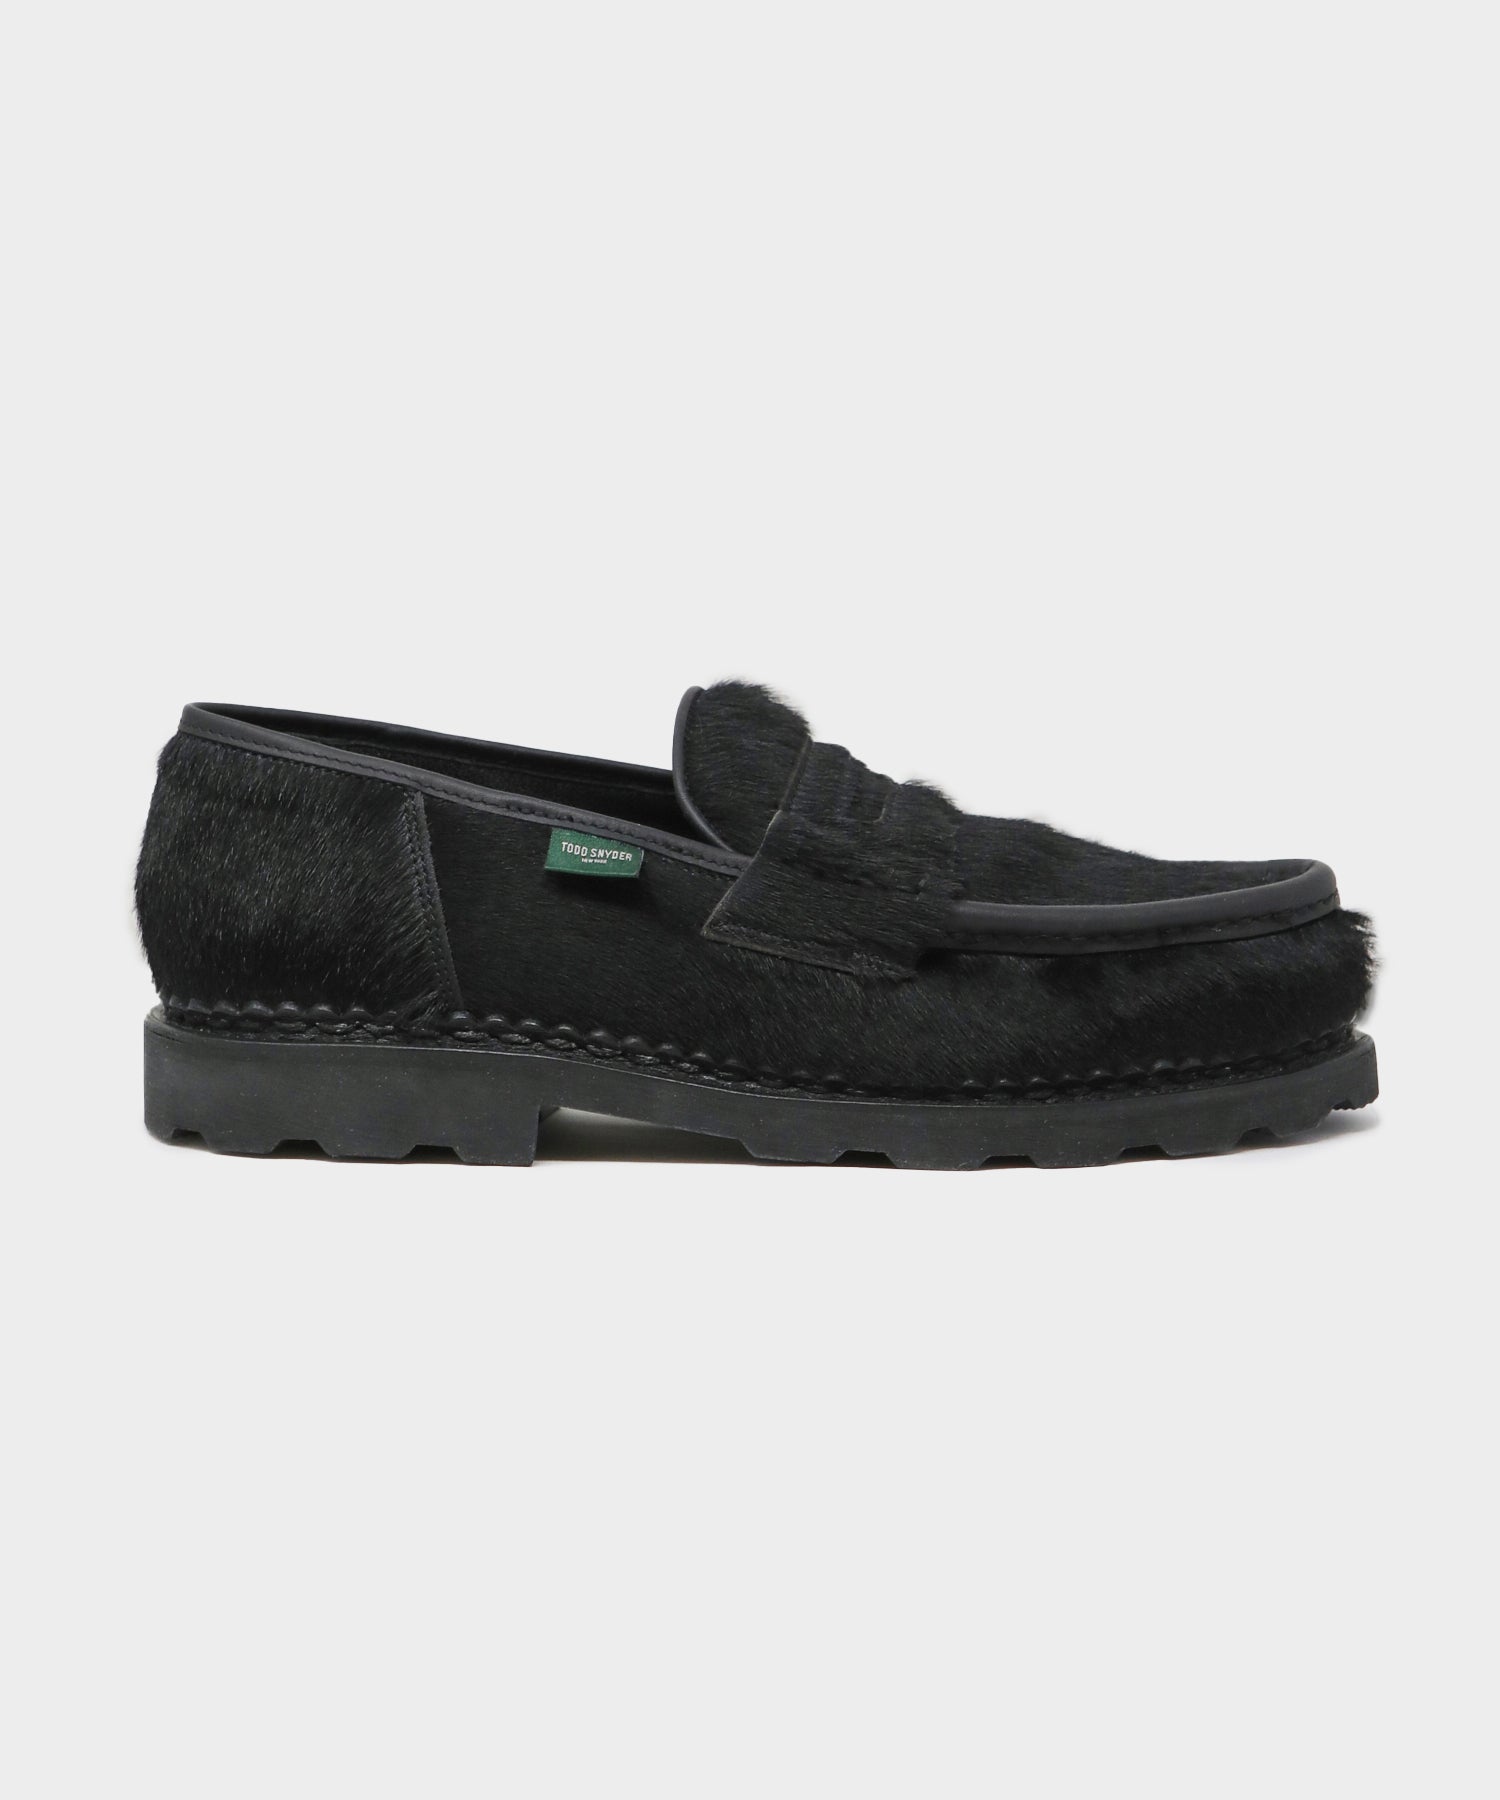 Todd Snyder X Paraboot Reims Black Pony Hair Loafer